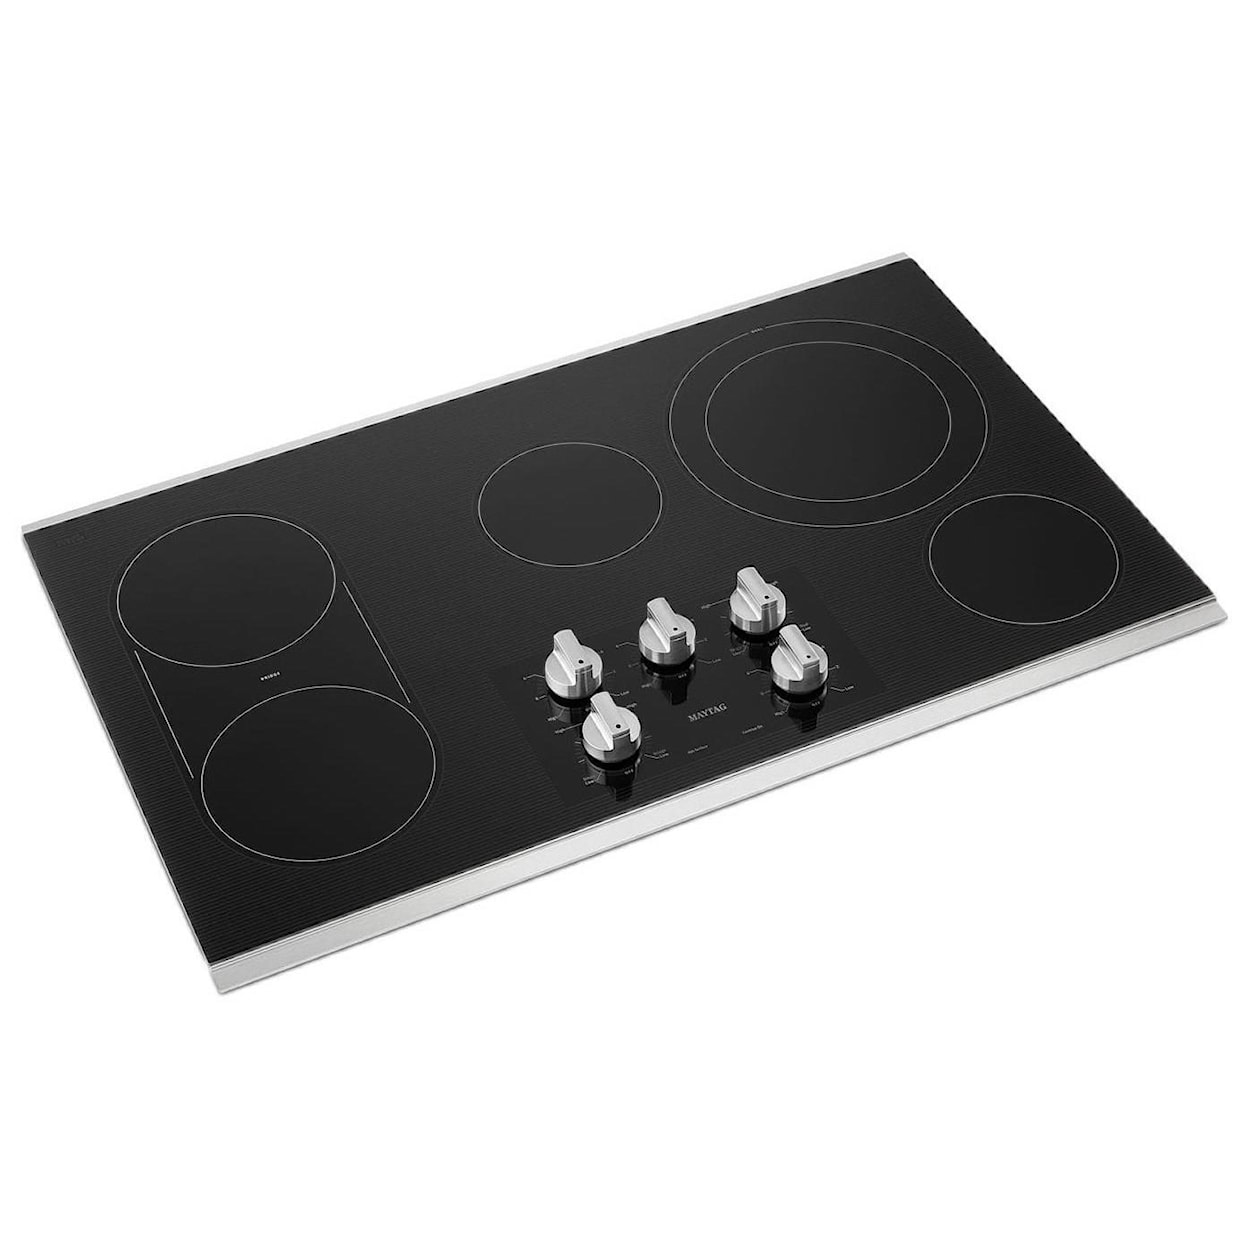 Maytag Electric Cooktops 36-Inch Electric Cooktop